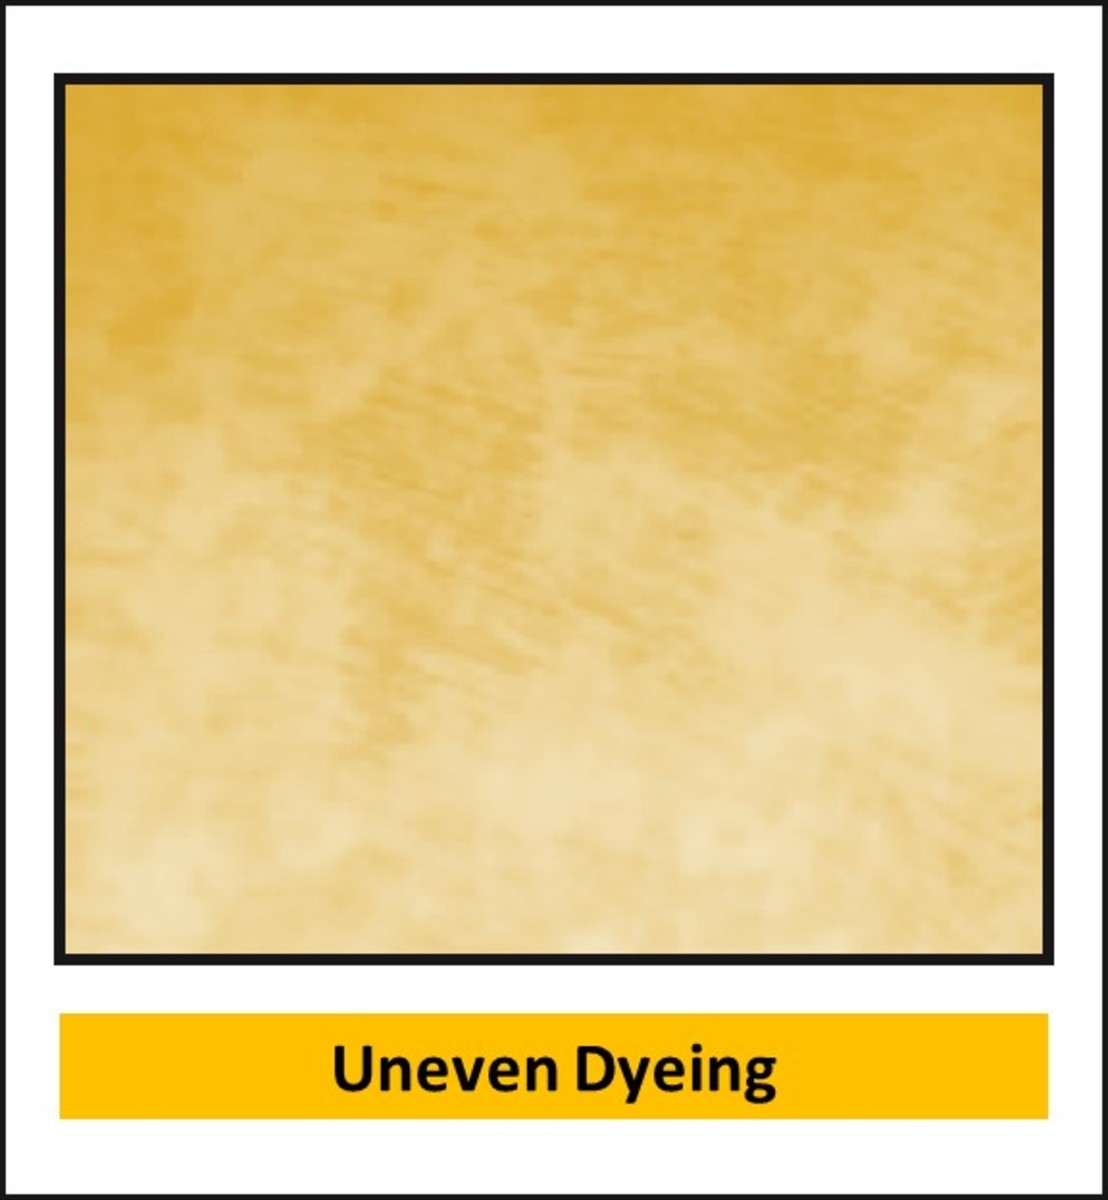 Uneven Dyeing